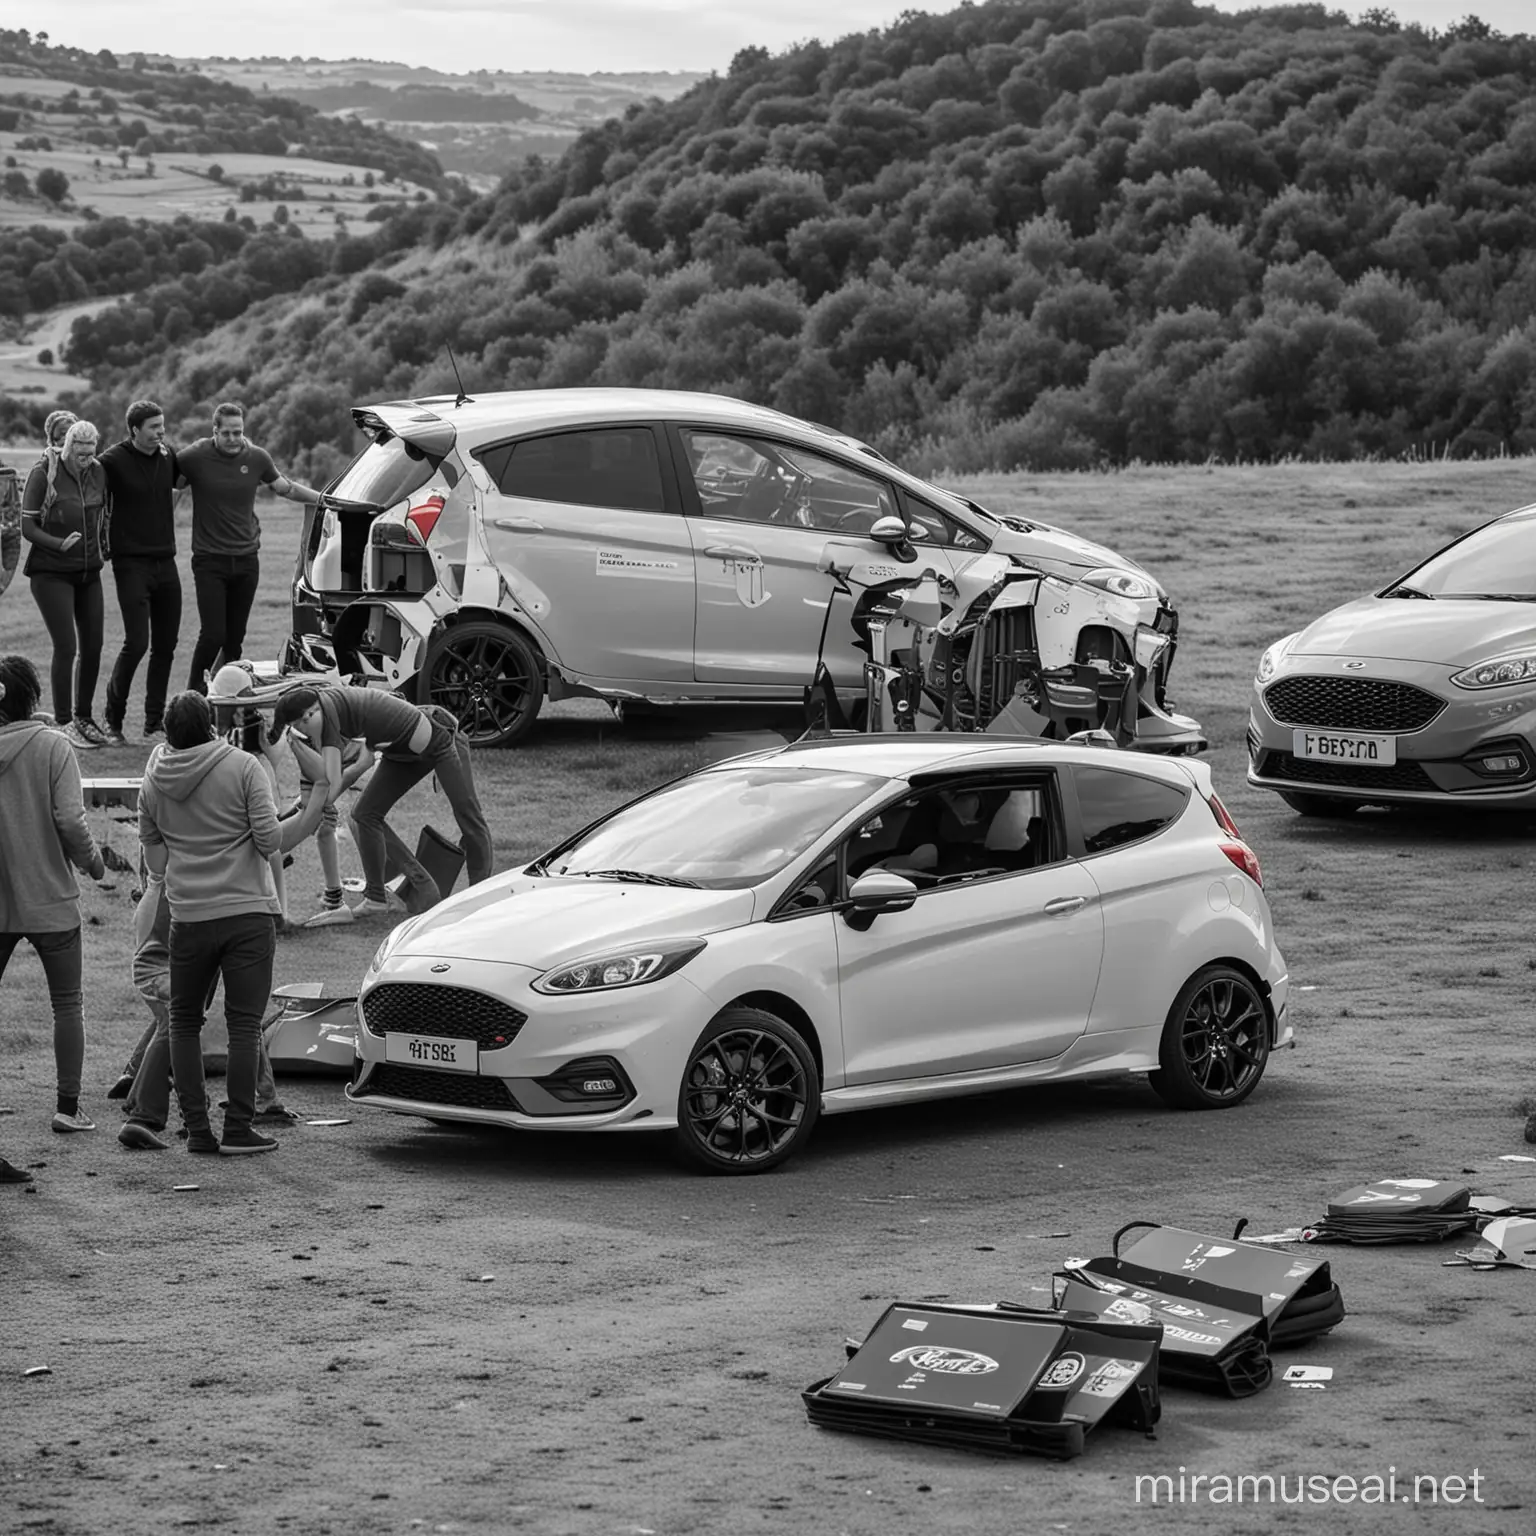 The image features a group of people posing for a photo outdoors. The picture is in black and white.Ford Fiesta ST The image shows a car parked on a background. It features a variety of tags related to land vehicles, car parts, and specific car models such as Fiat, Citroen, and Nissan.